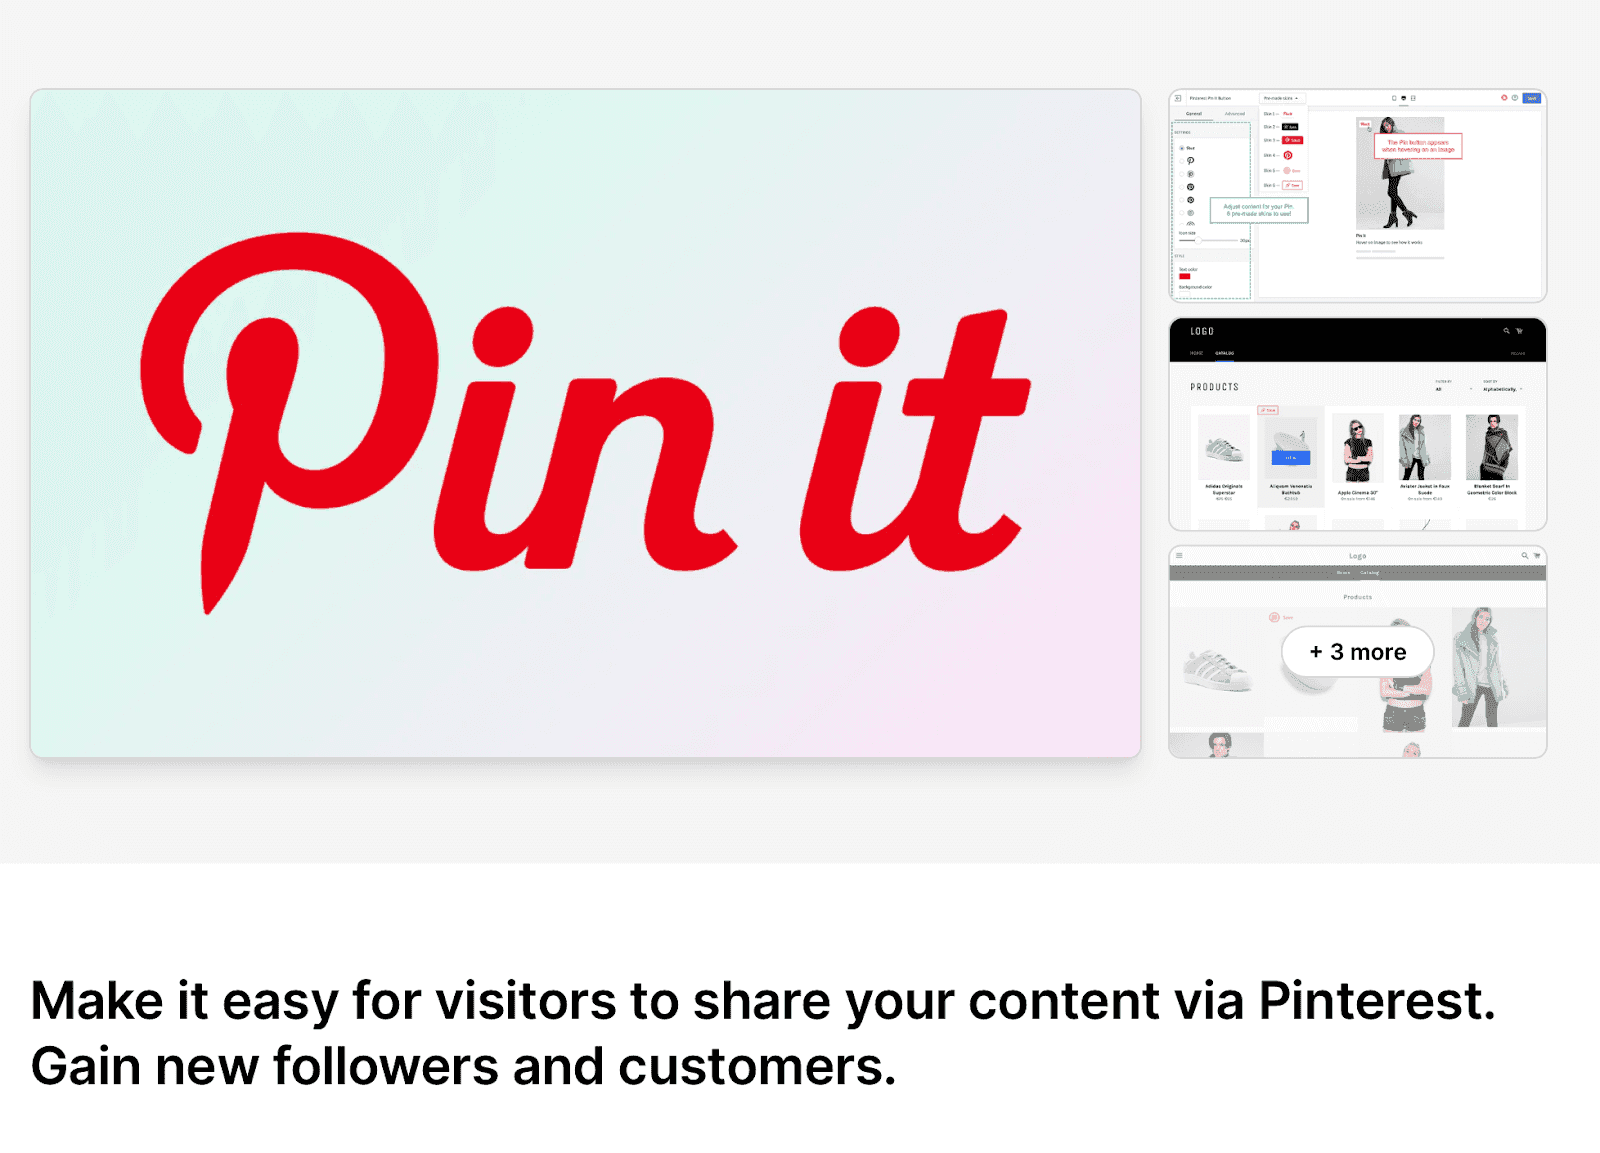 Make it easy for visitors to share your content via Pinterest